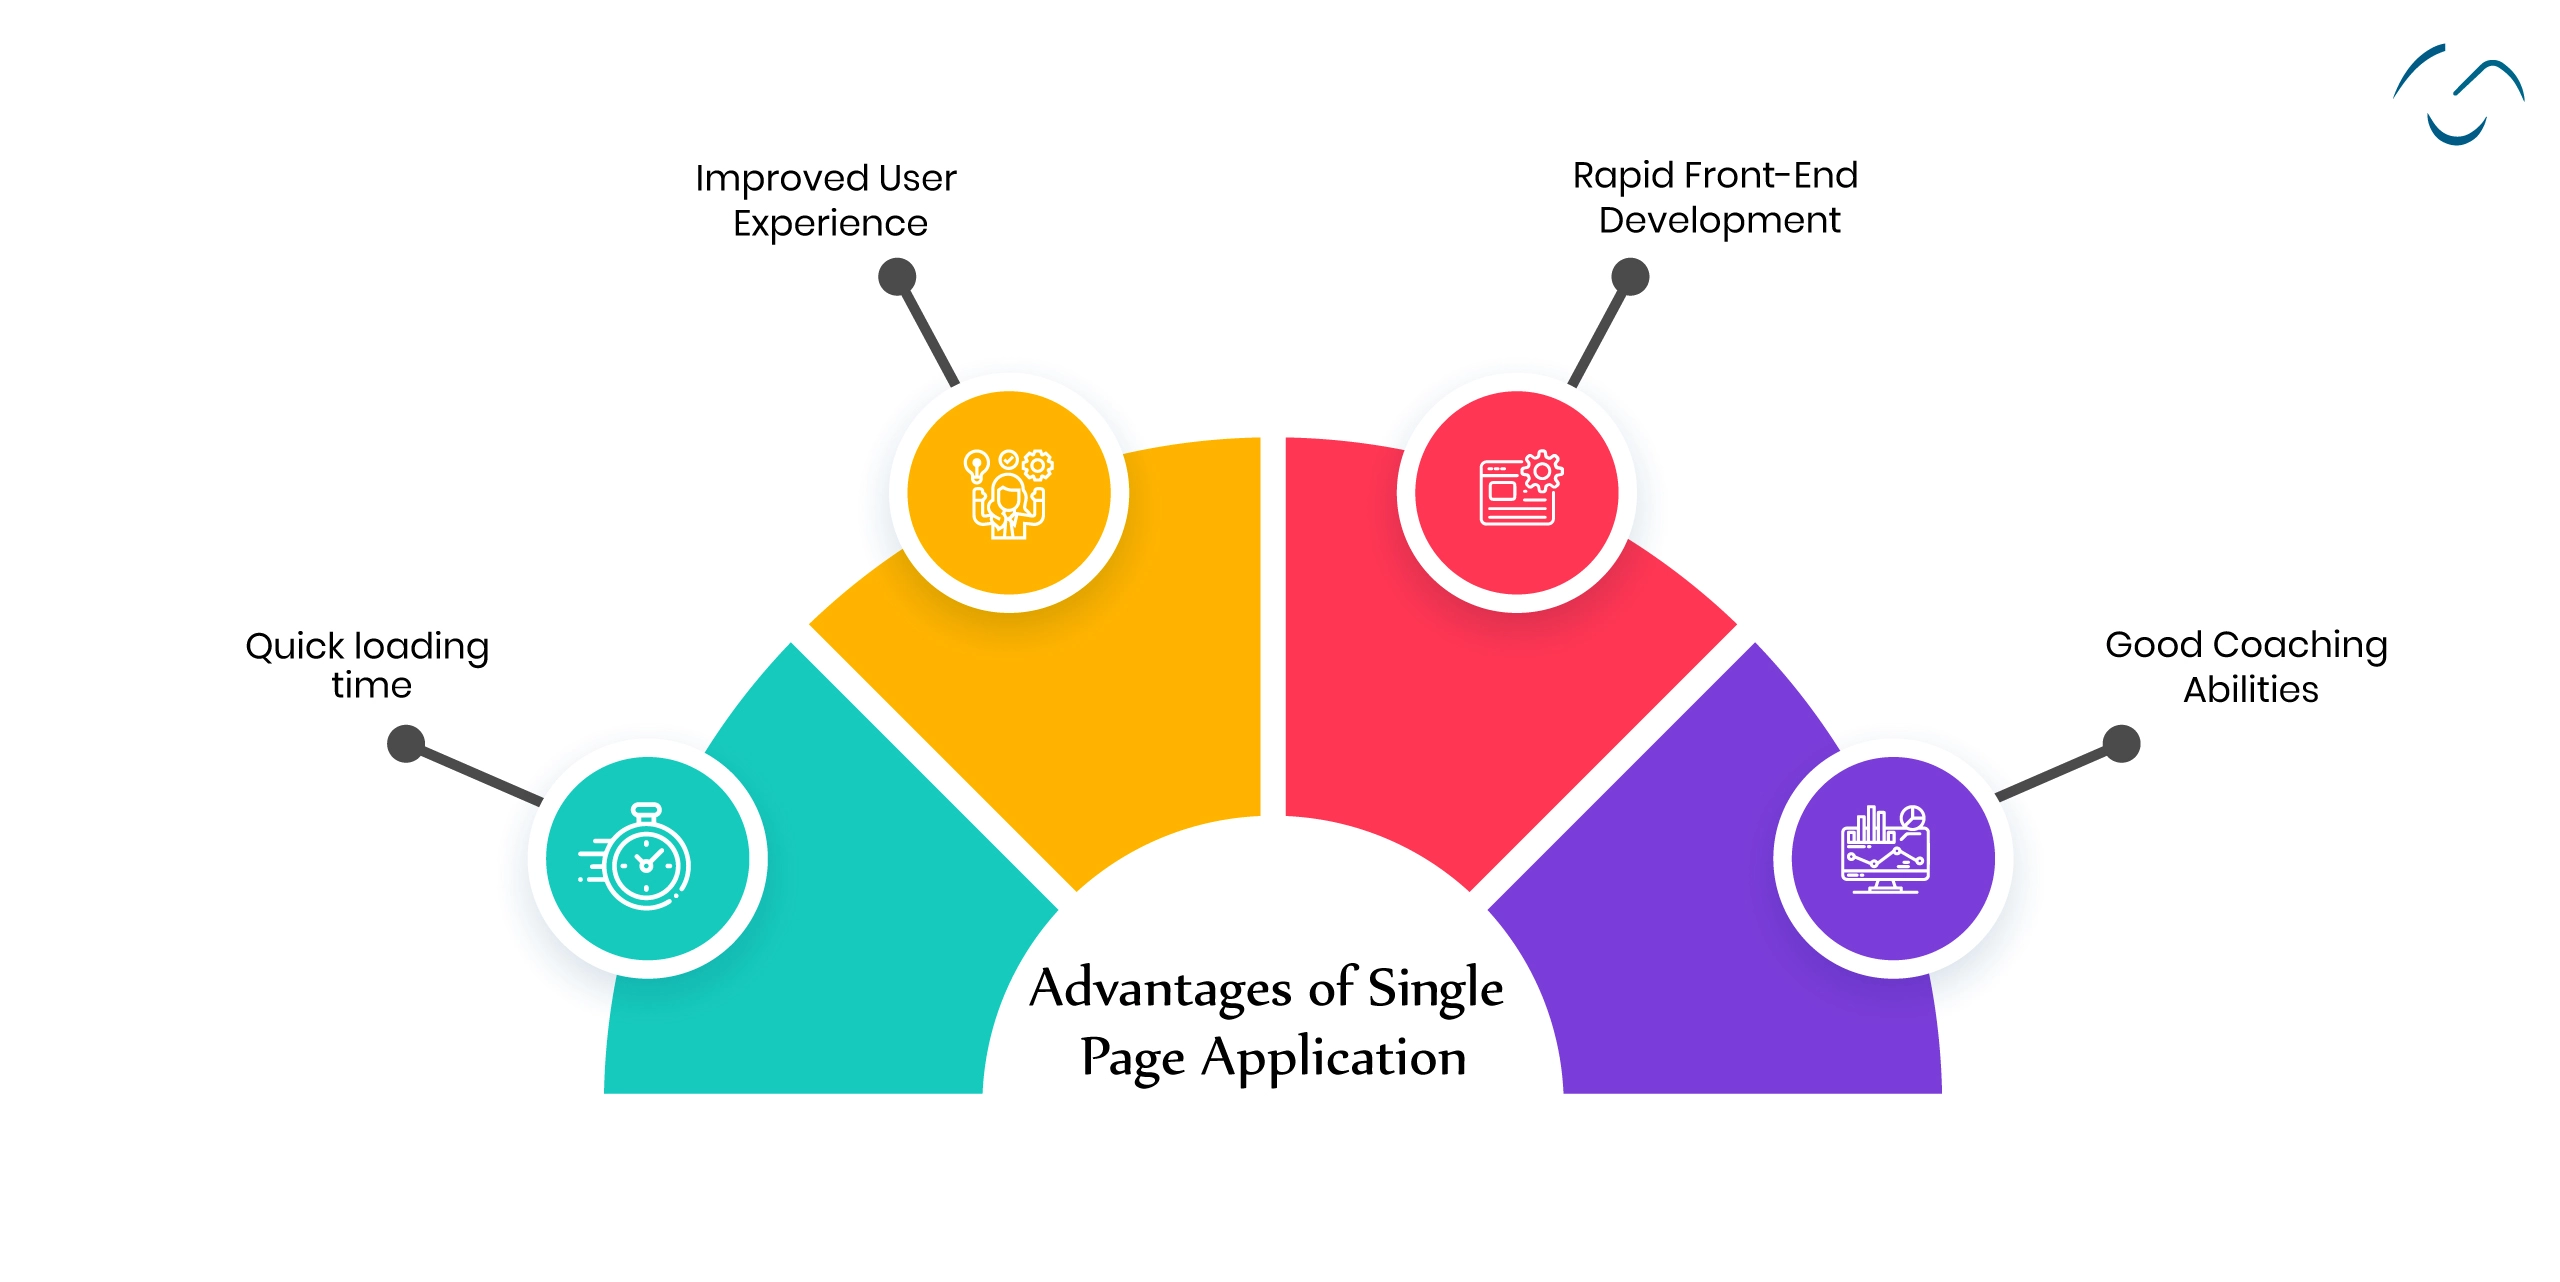 Advantages of Single-Page Applications